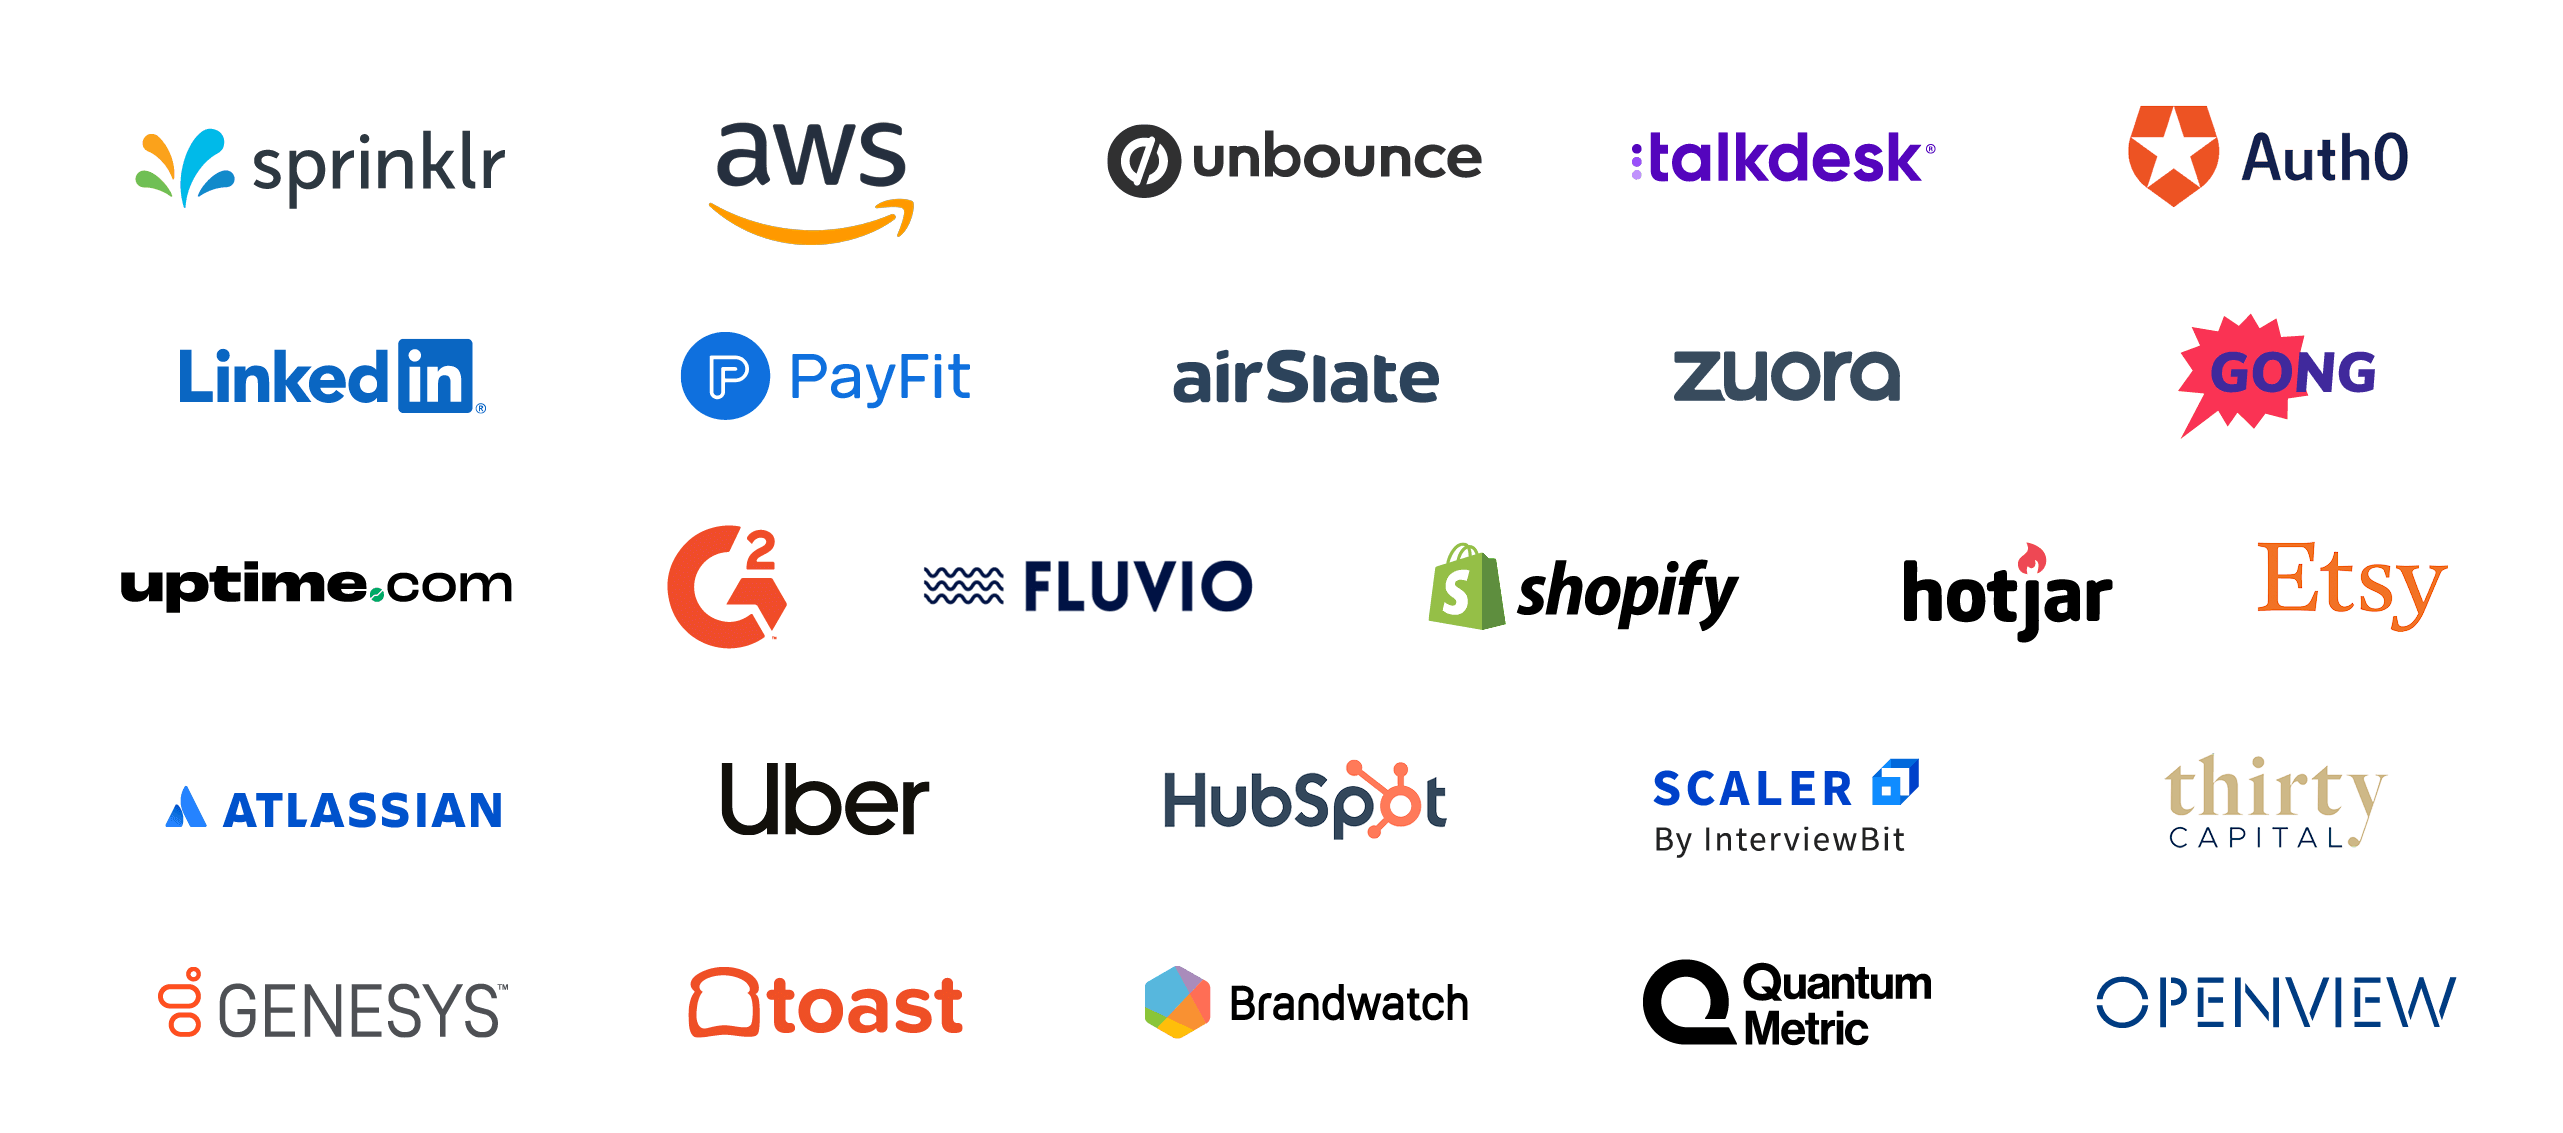 The PMM Leaders: Fellowship program has been built in collaboration with Director and VP level product marketers from some of the world’s best-known brands - we’re talking Amazon Web Services, LinkedIn, G2, Uber, Unbounce, and more.